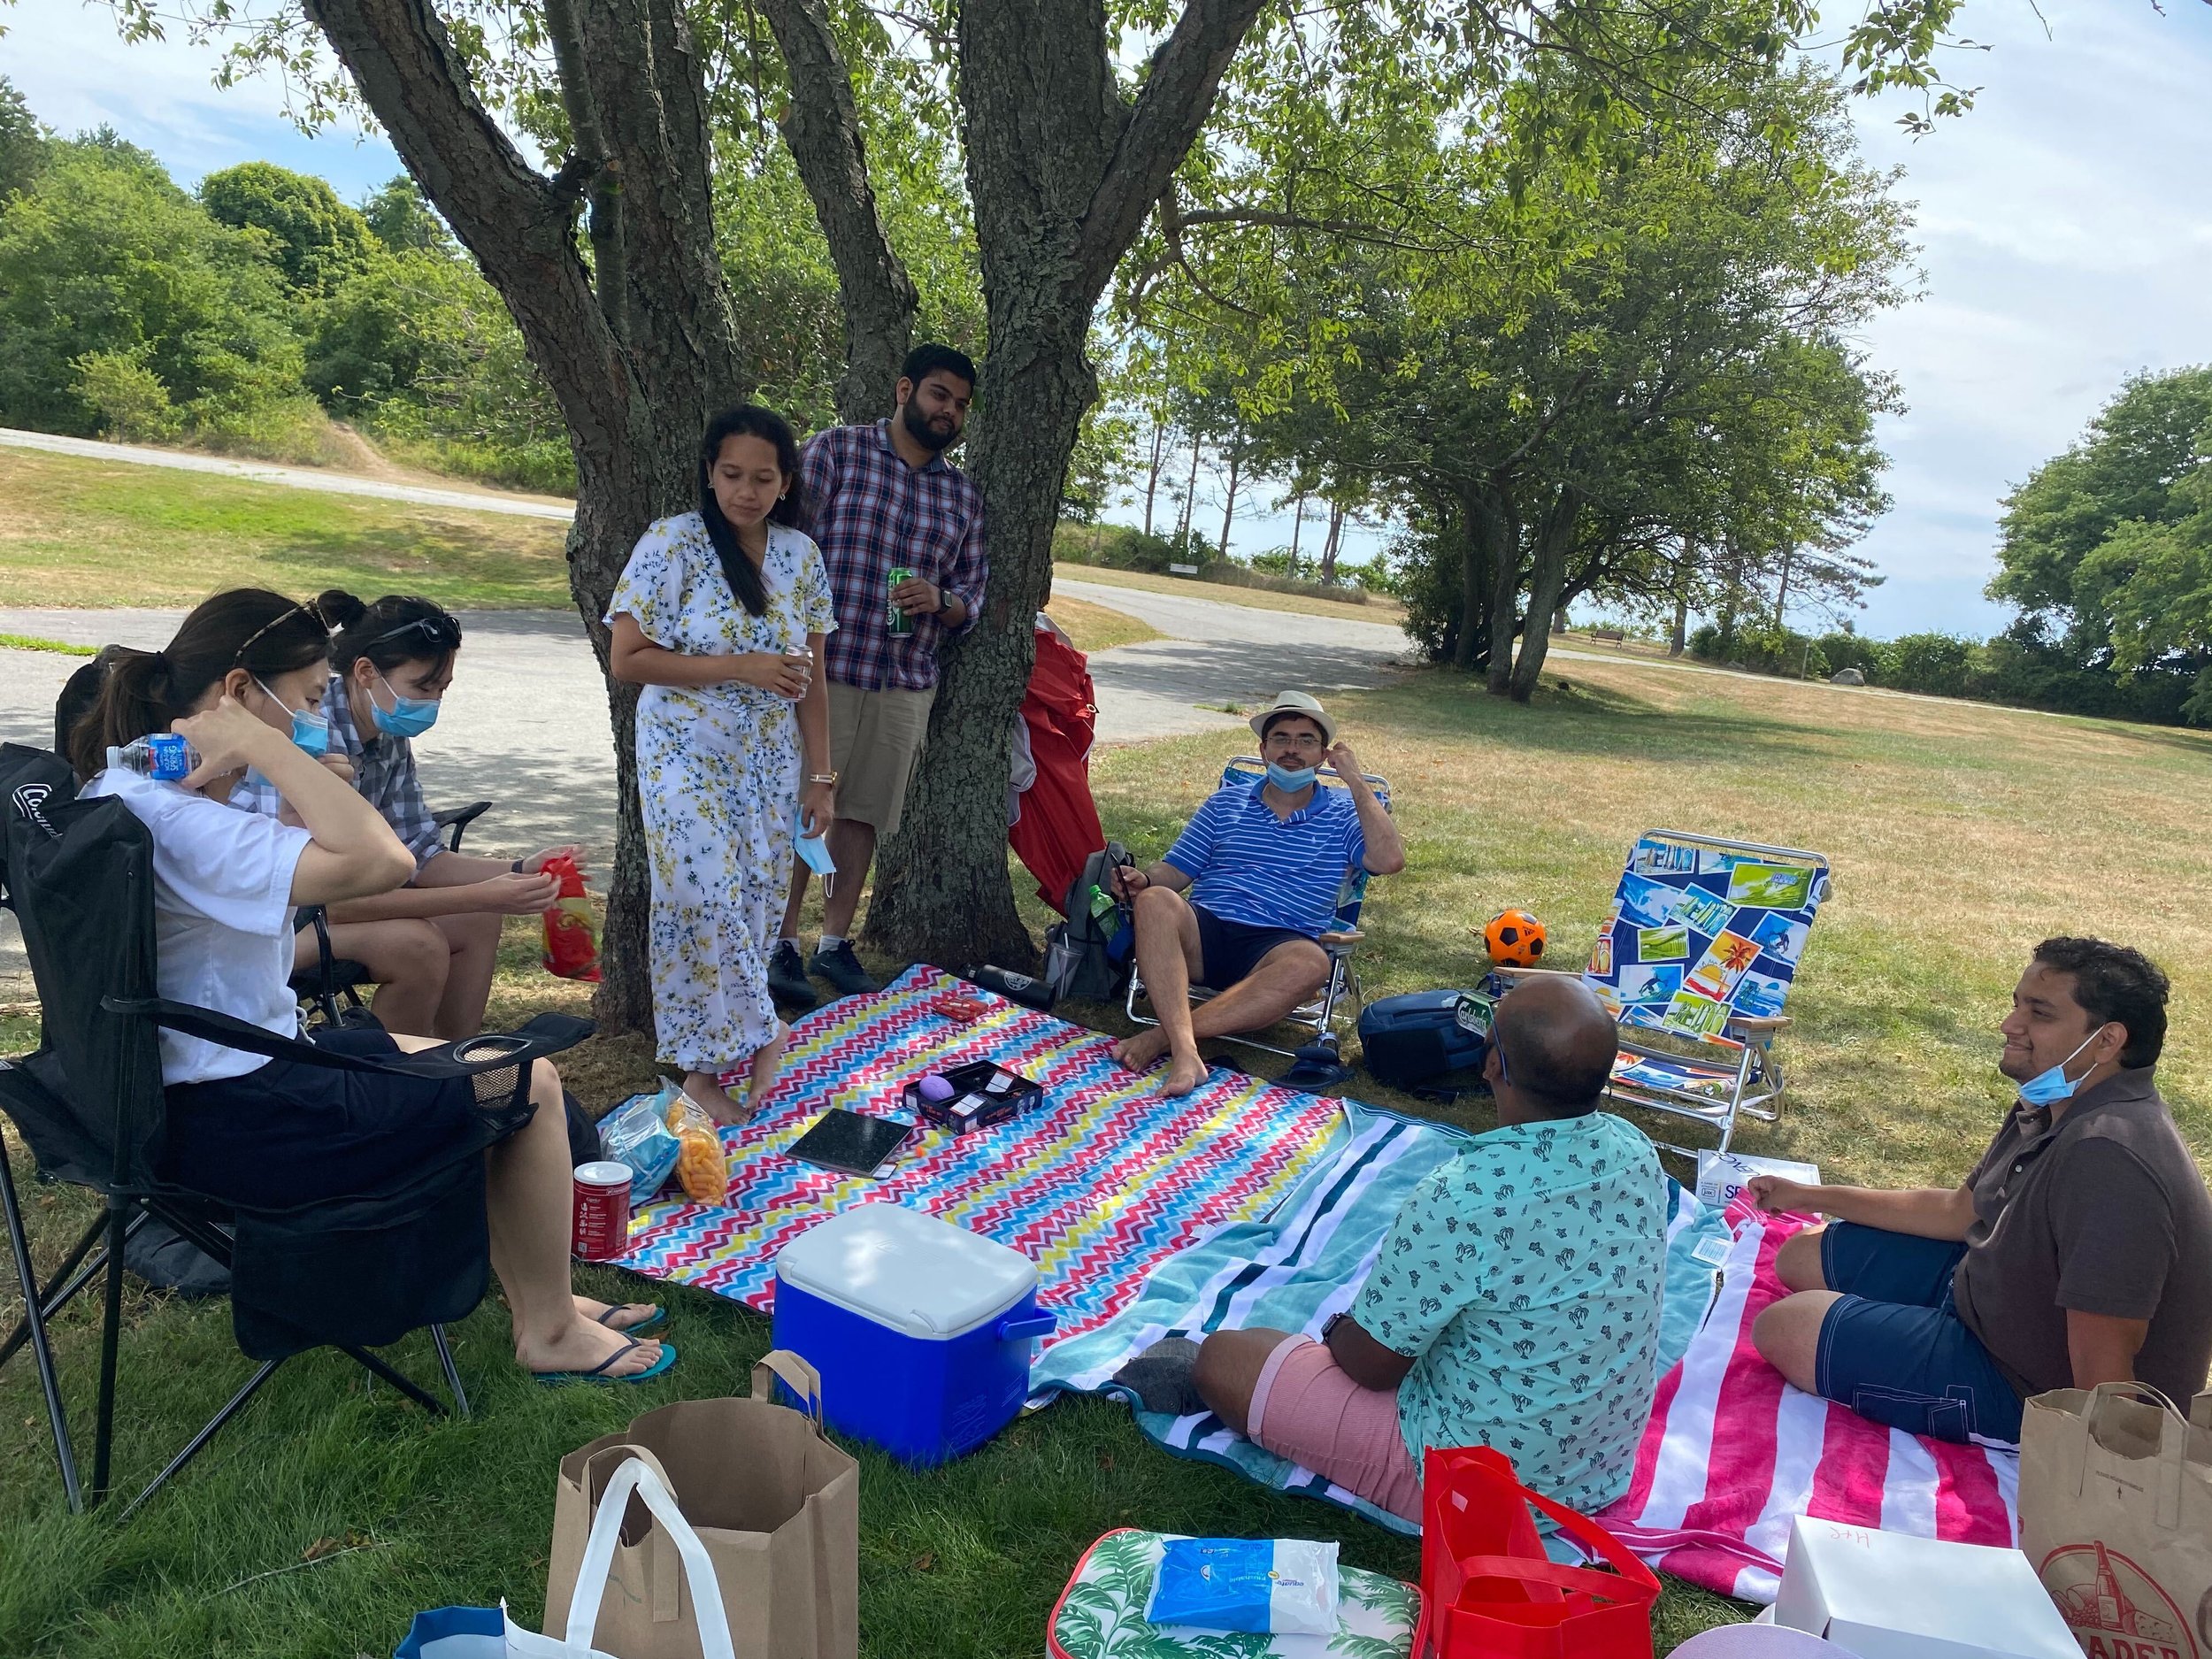 Lab outing @ Nahant, August 2020